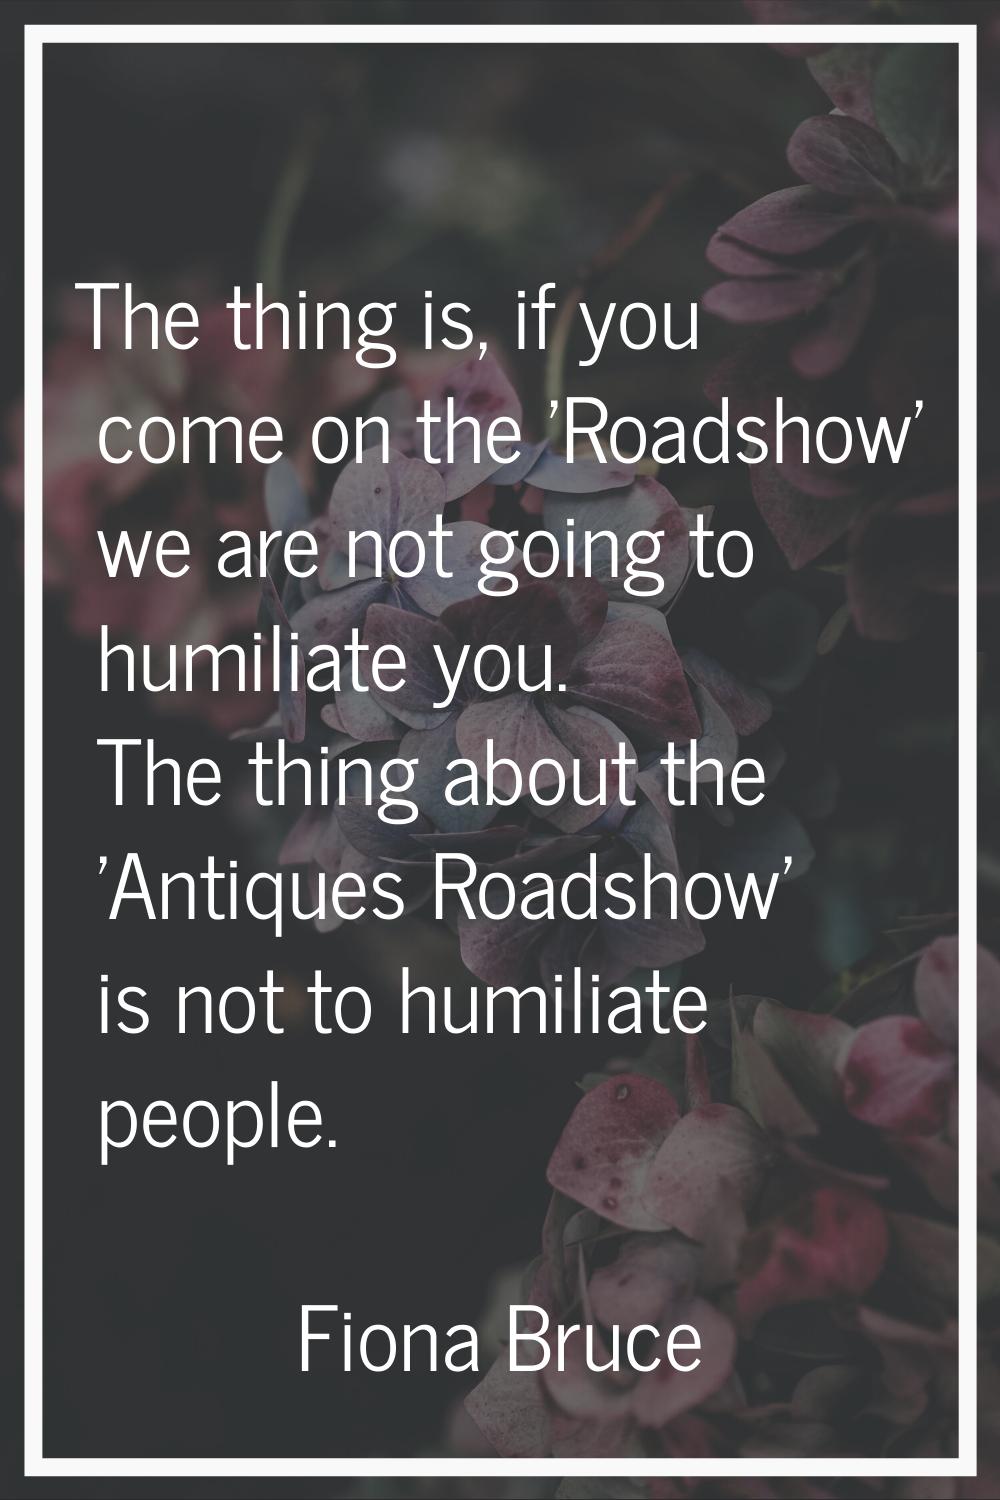 The thing is, if you come on the 'Roadshow' we are not going to humiliate you. The thing about the 